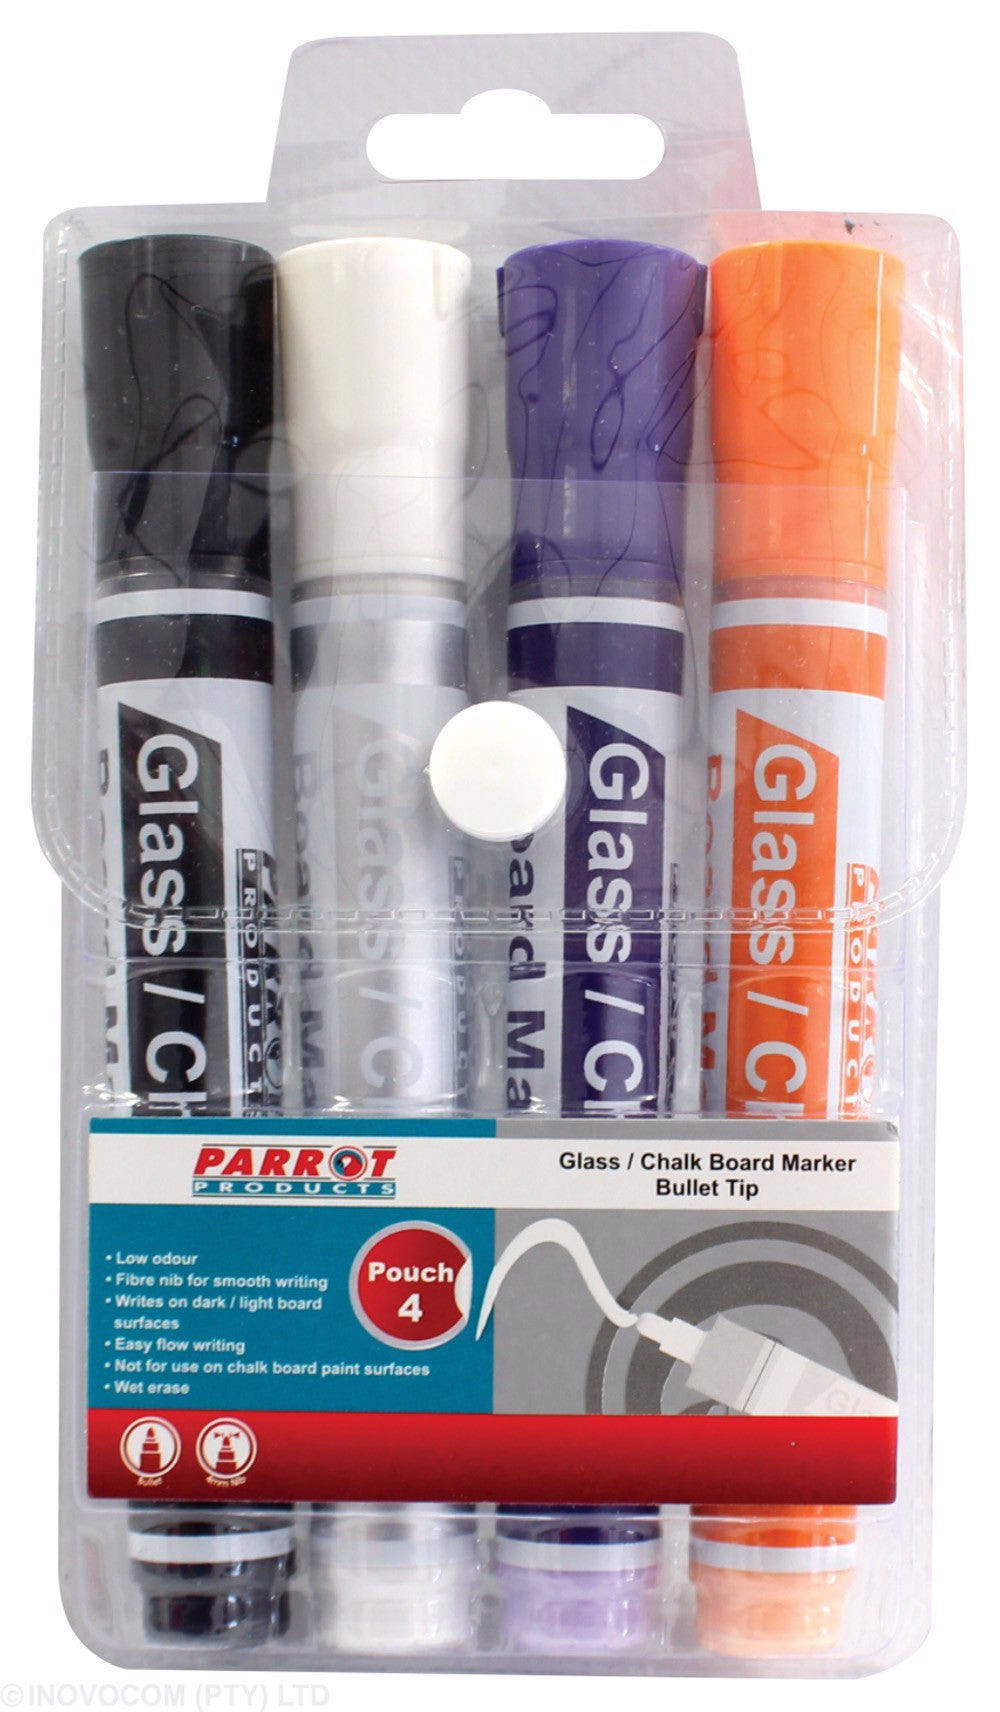 Parrot Glass/Chalk Board Markers Pouch 4 Assorted